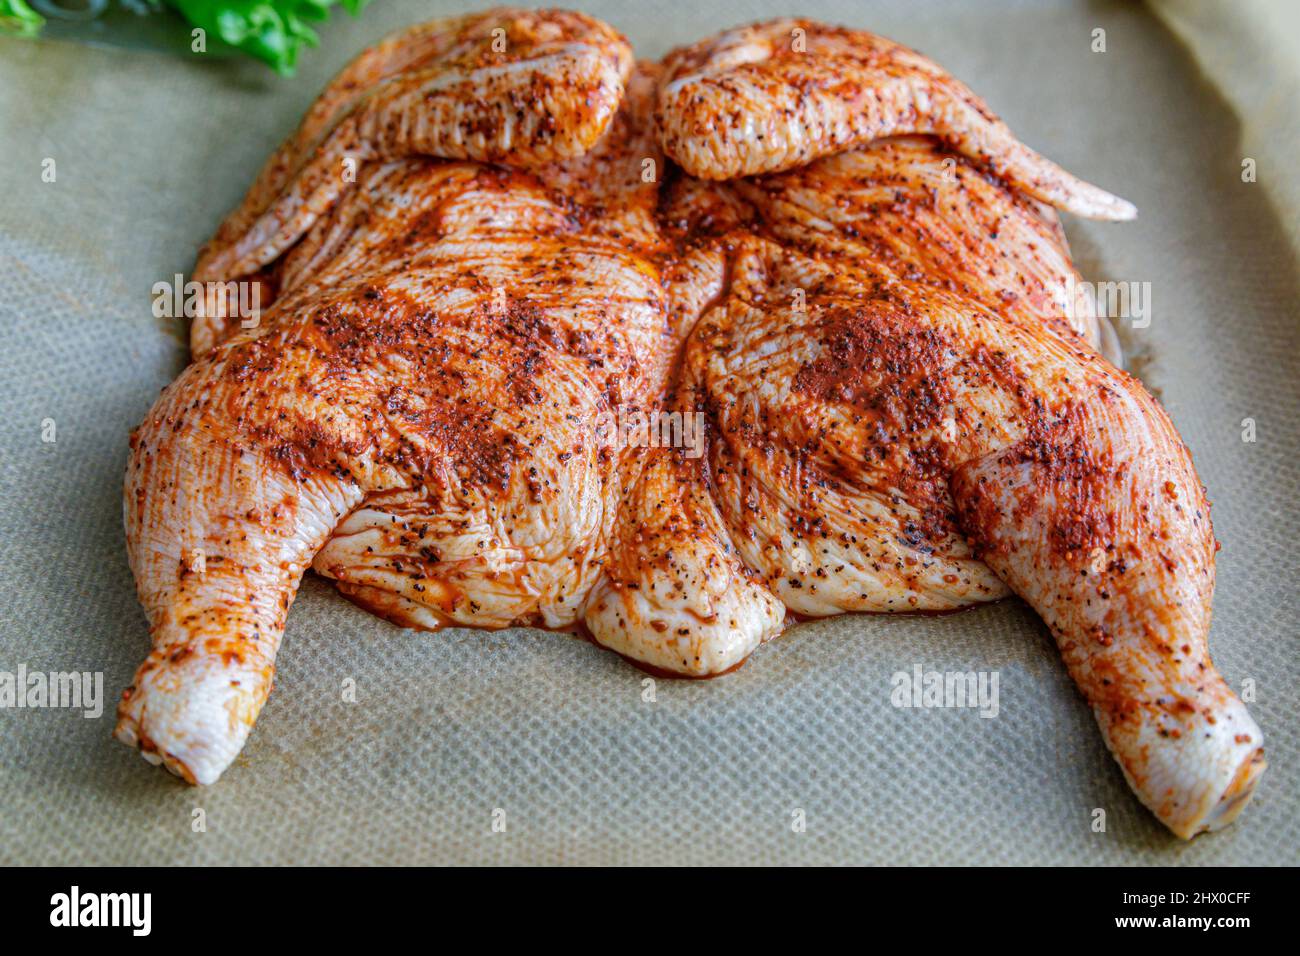 Raw whole chicken on an oven tray. chicken tobacco Stock Photo